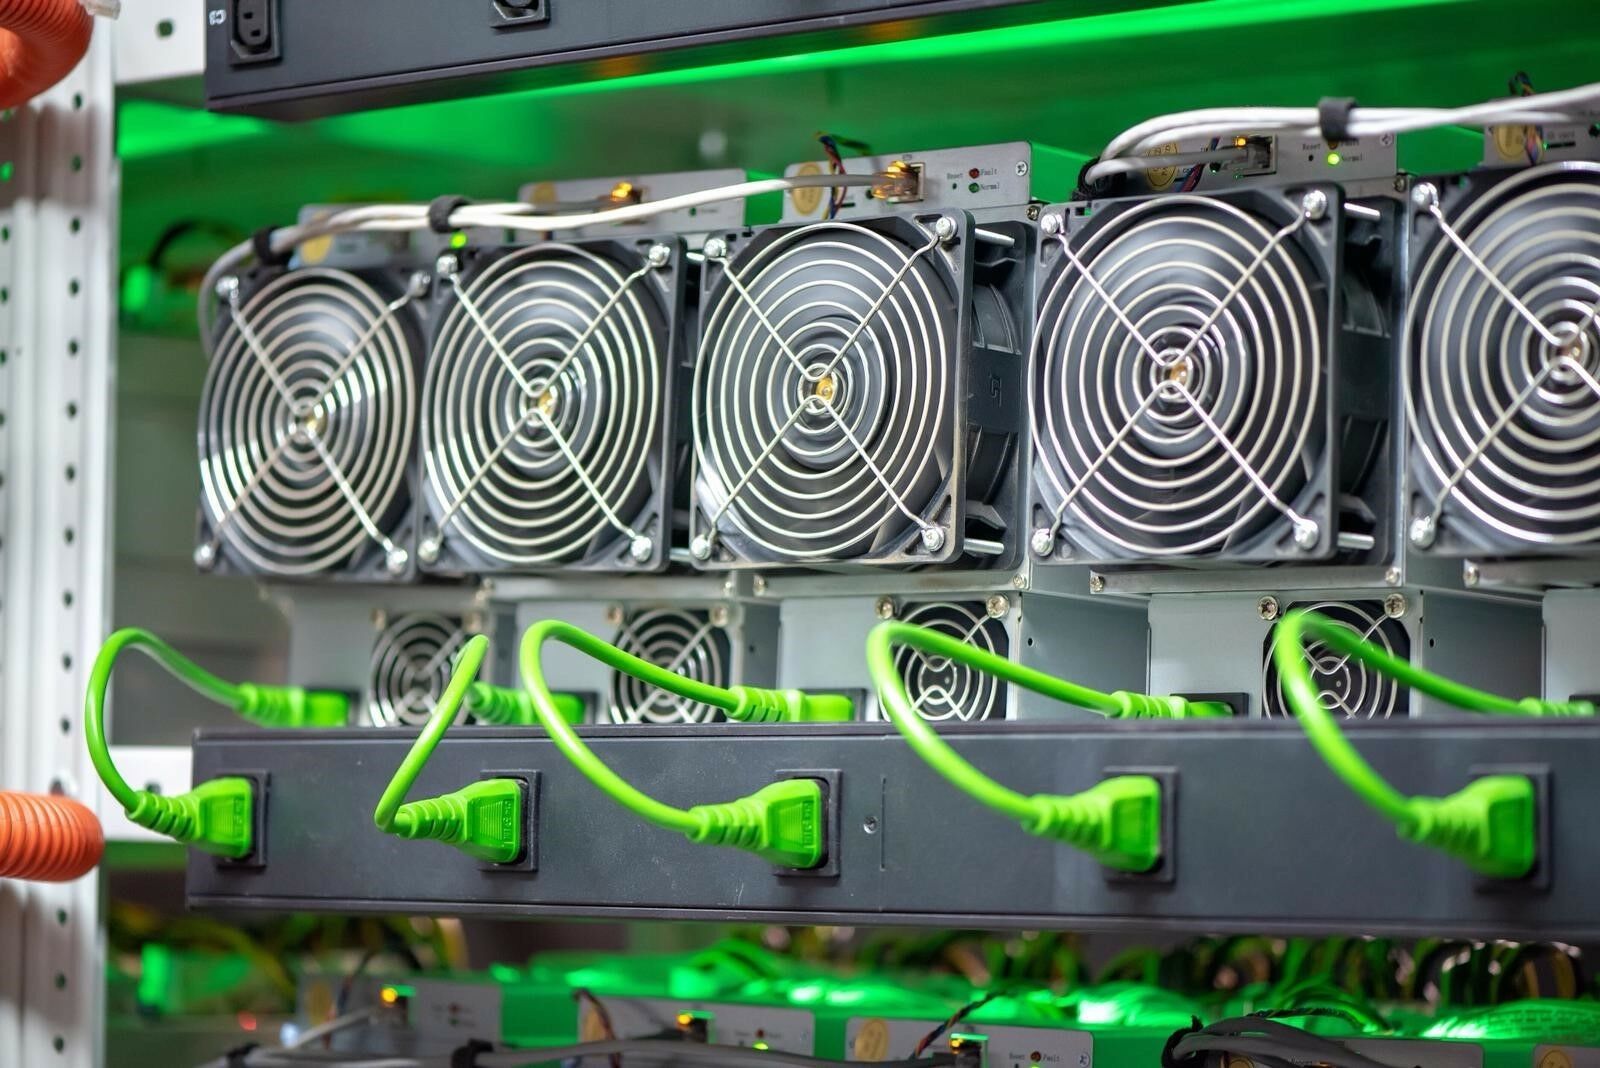 Altcoins account for a third of the total mining hashrate